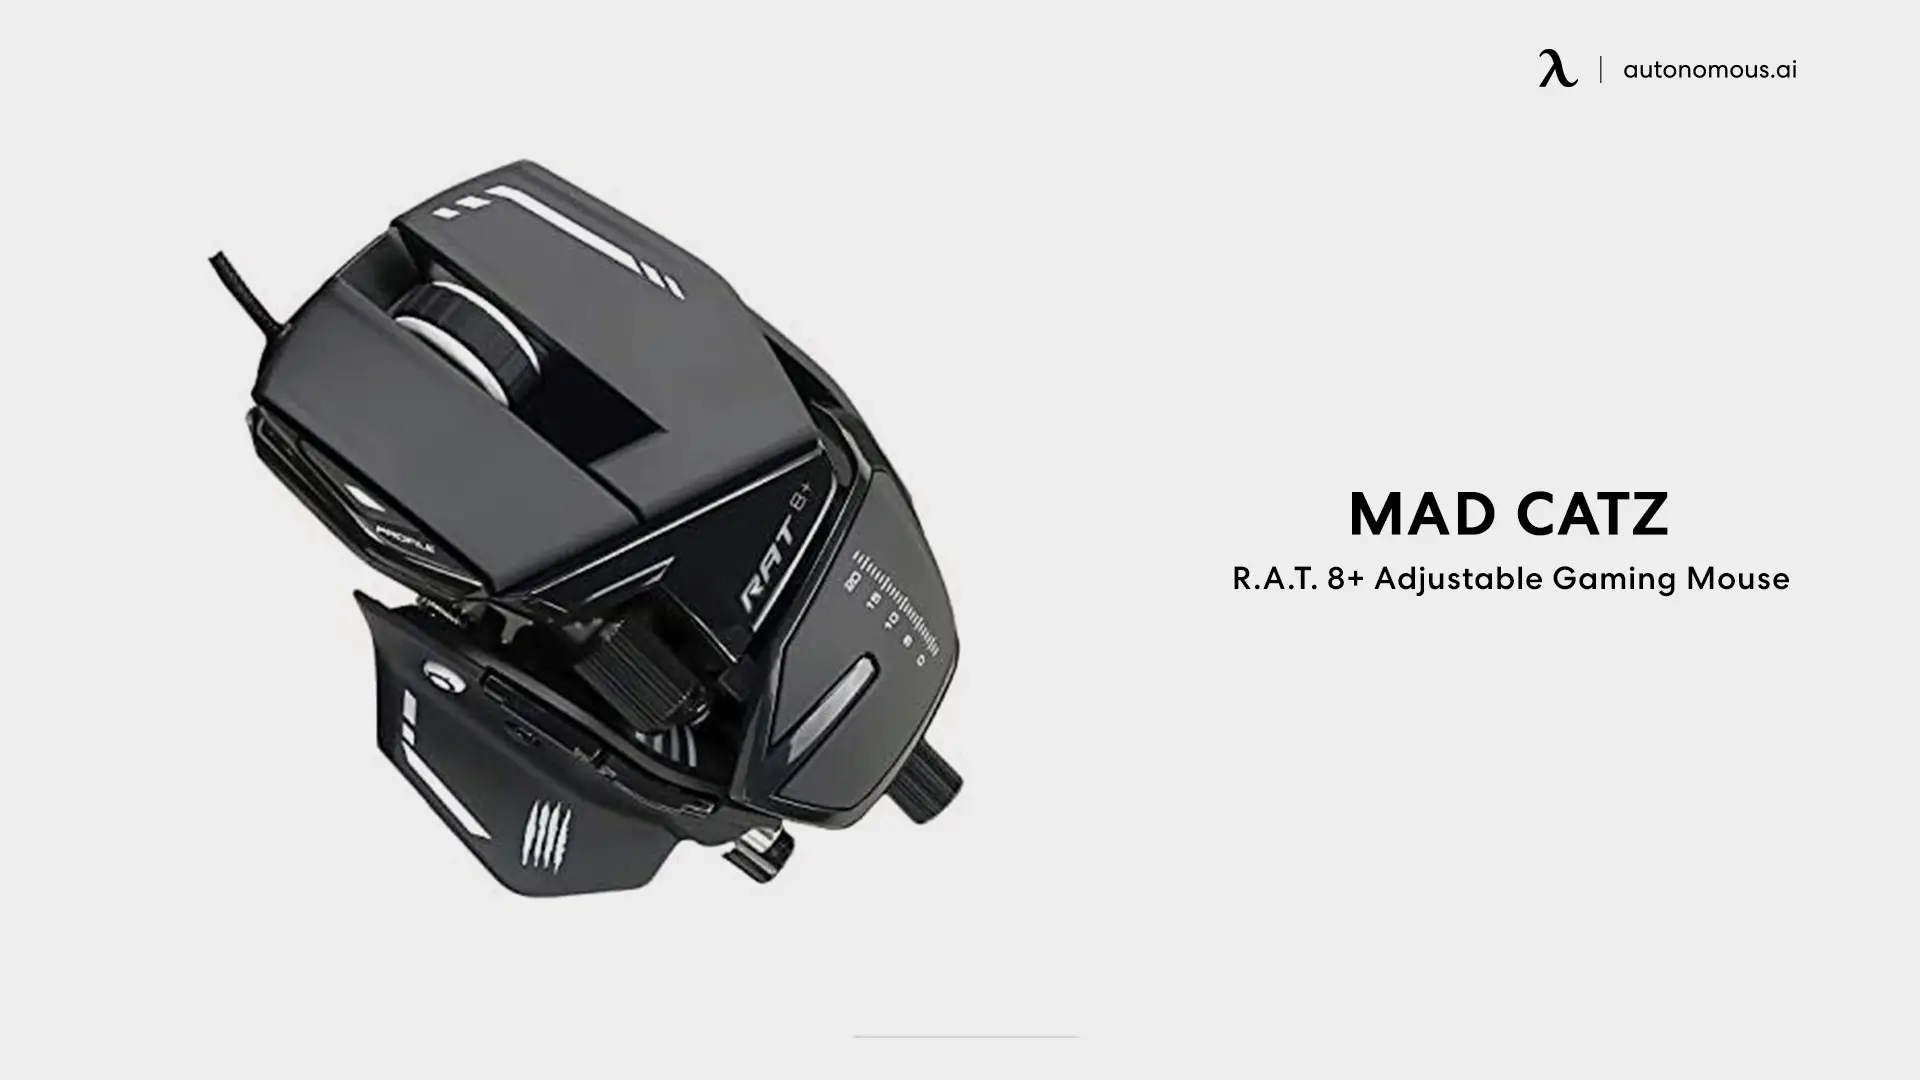 Mad Catz R.A.T. 8+ Adjustable Gaming Mouse